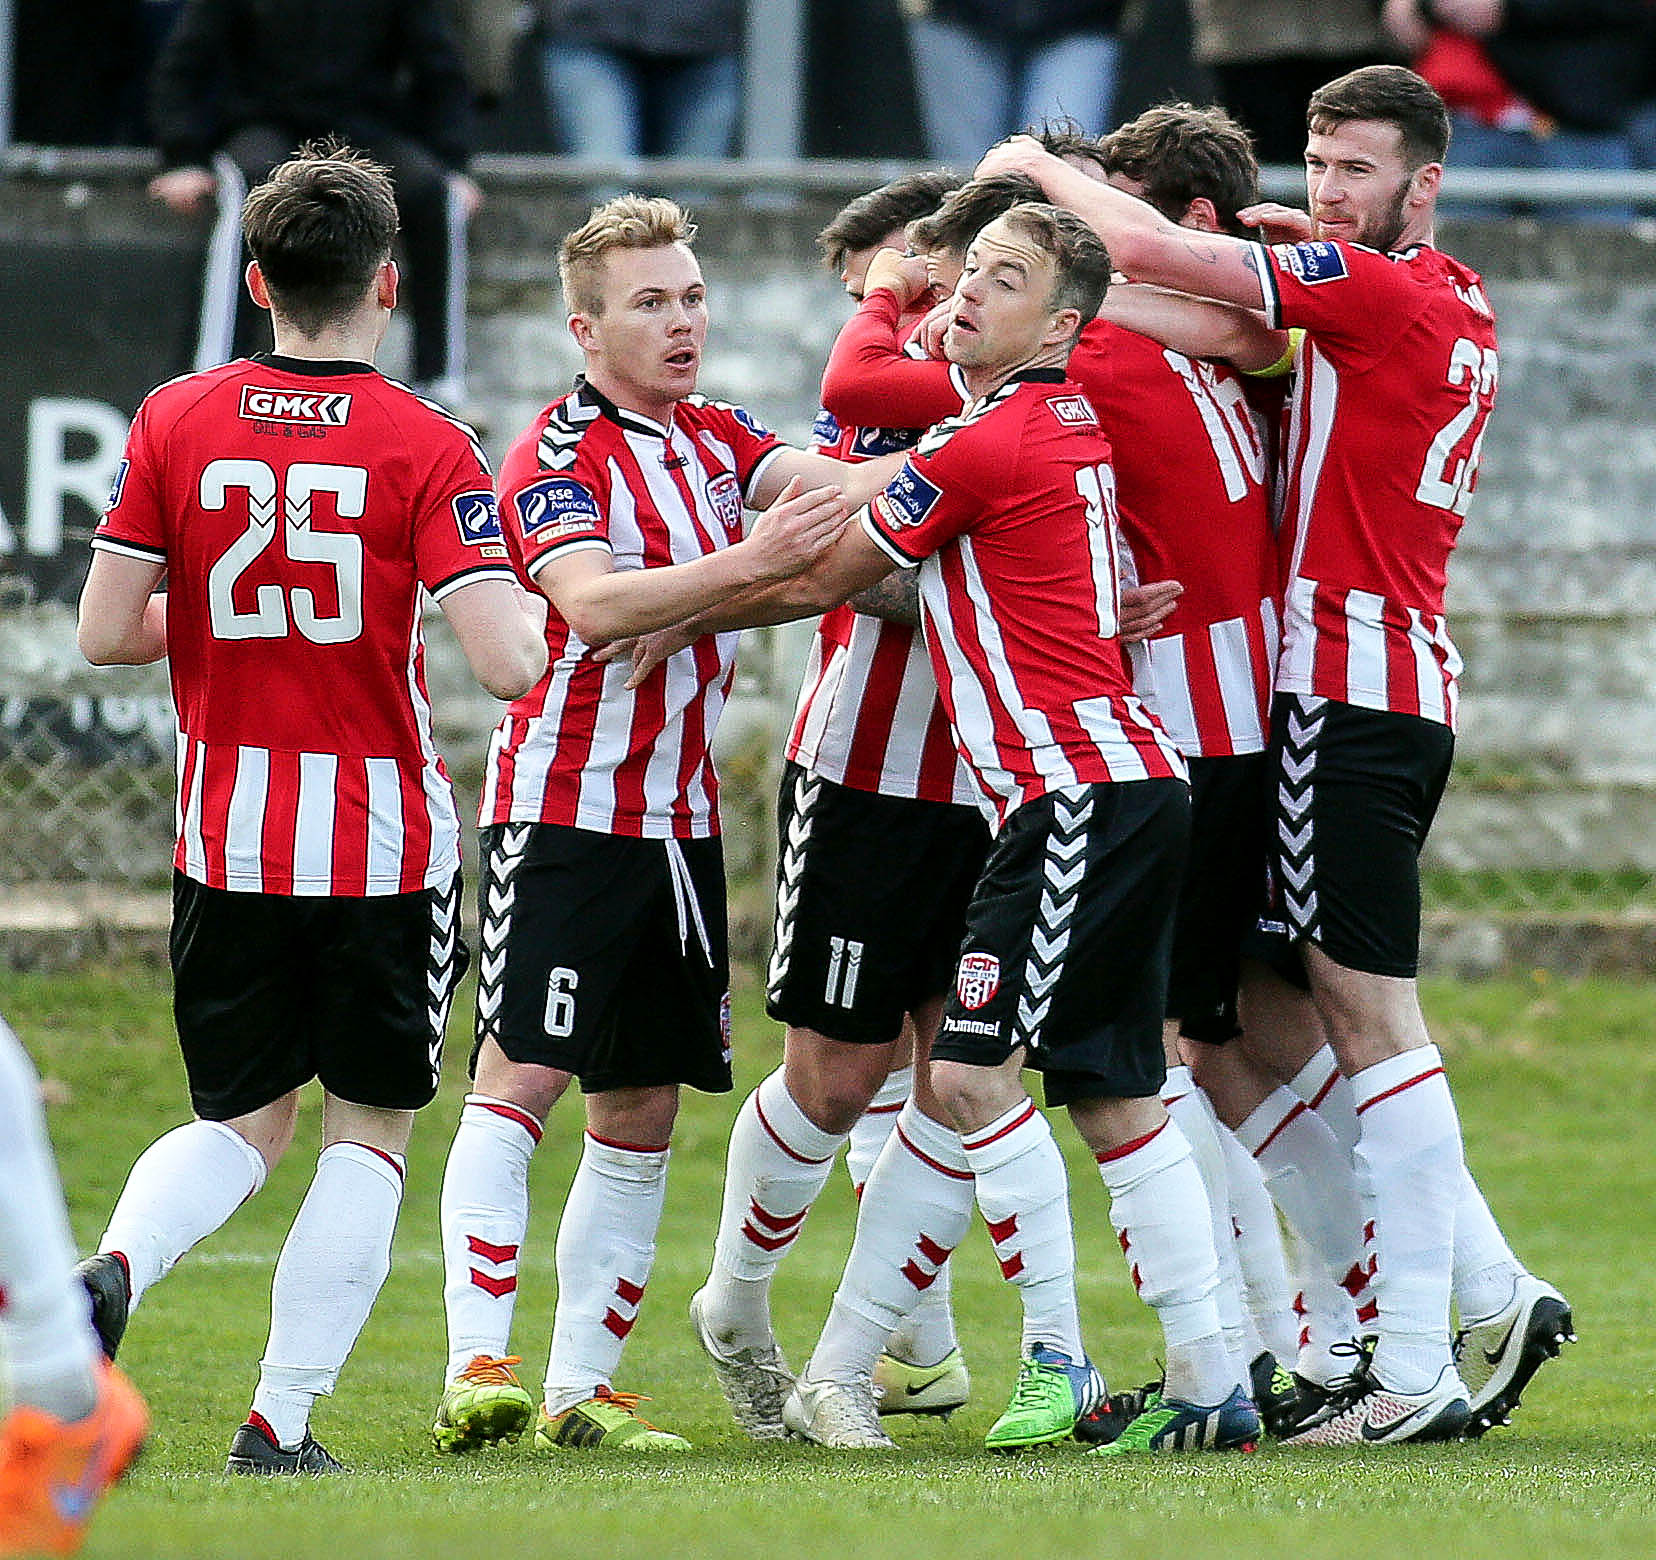 Derry City – Waterford (Pick, Prediction, Preview) Preview